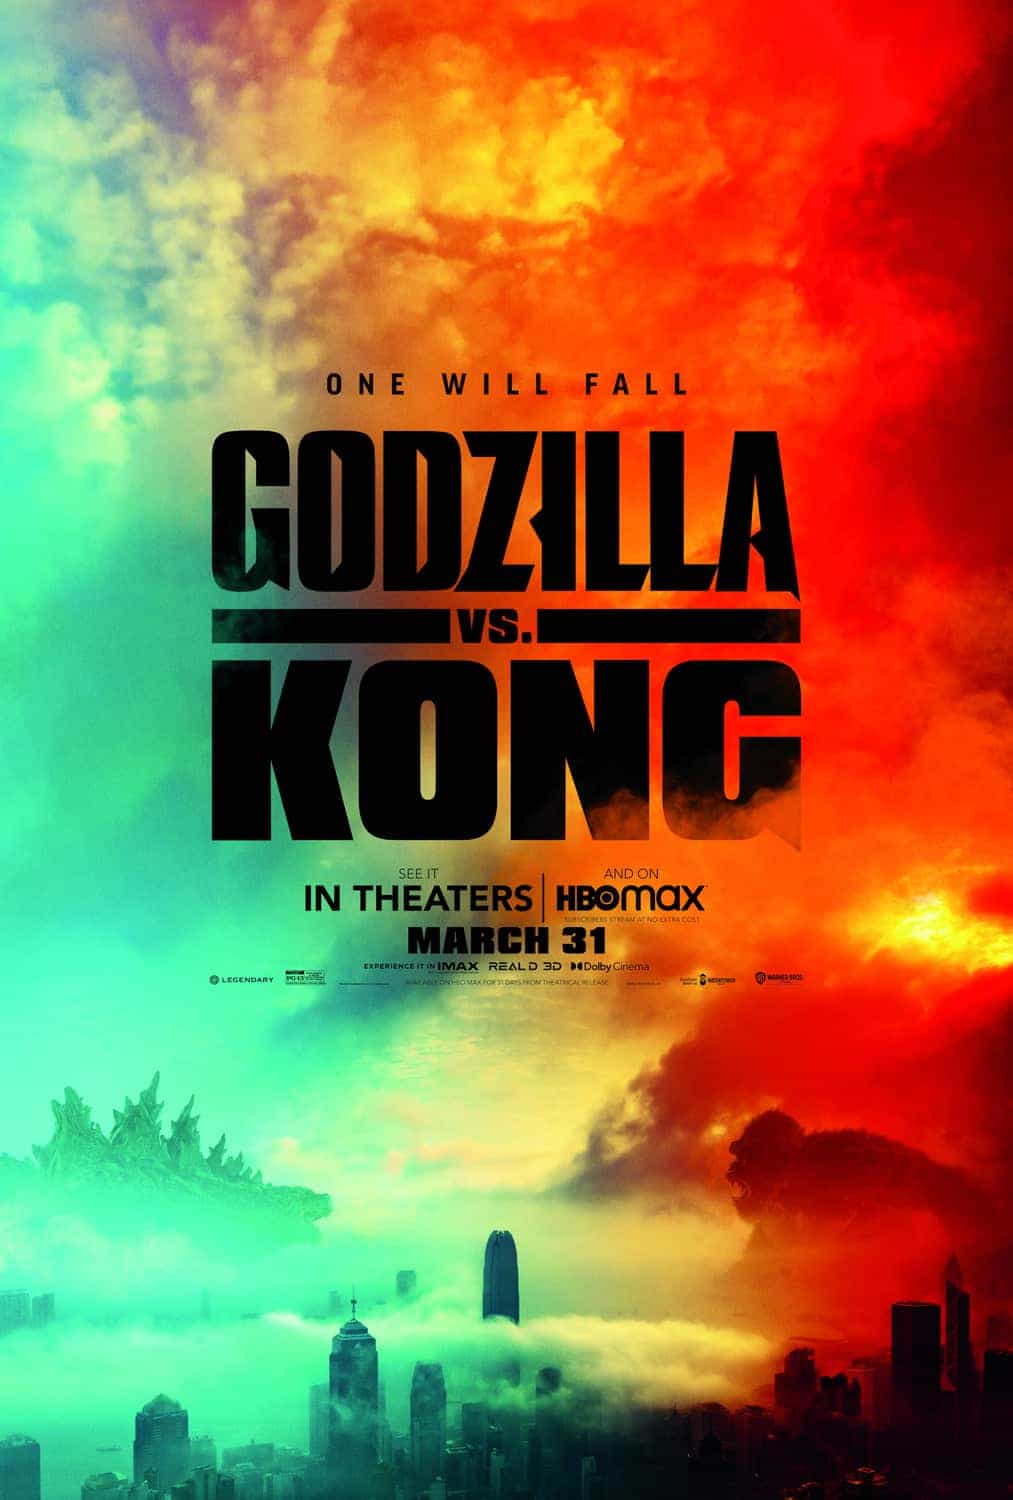 Godzilla Vs. Kong is given a 12A age rating in the UK for moderate fantasy violence, threat